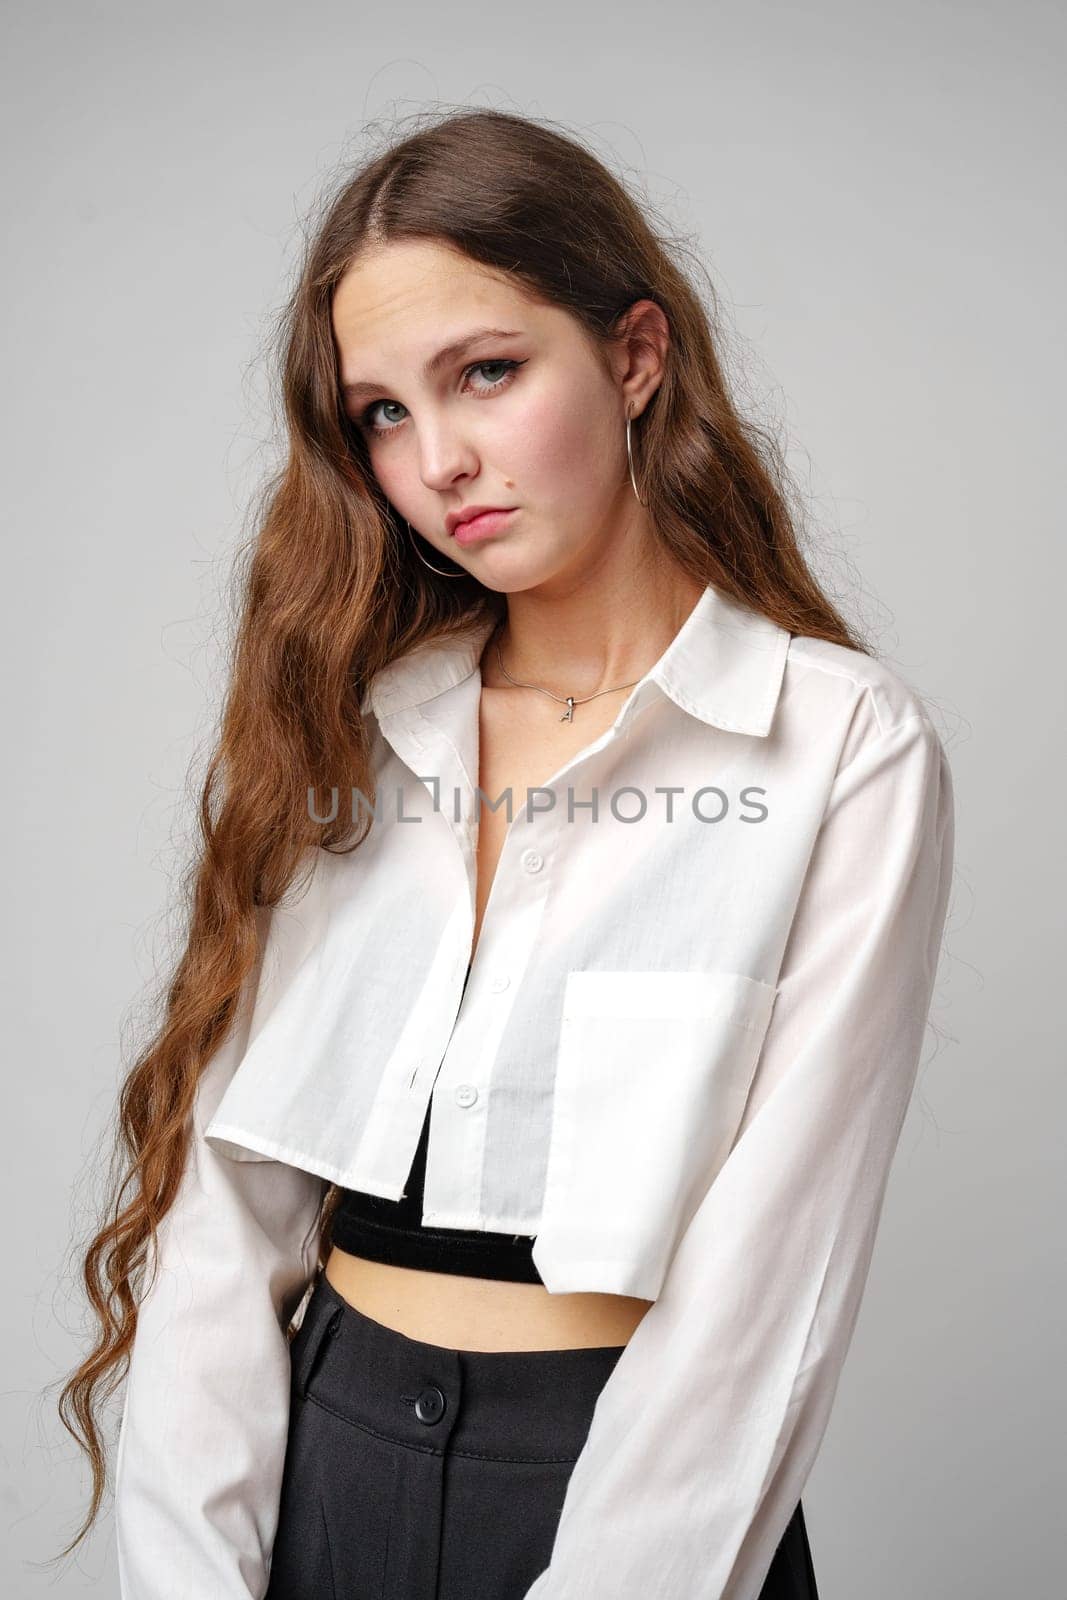 Woman With Long Hair in White Shirt and Black Pants